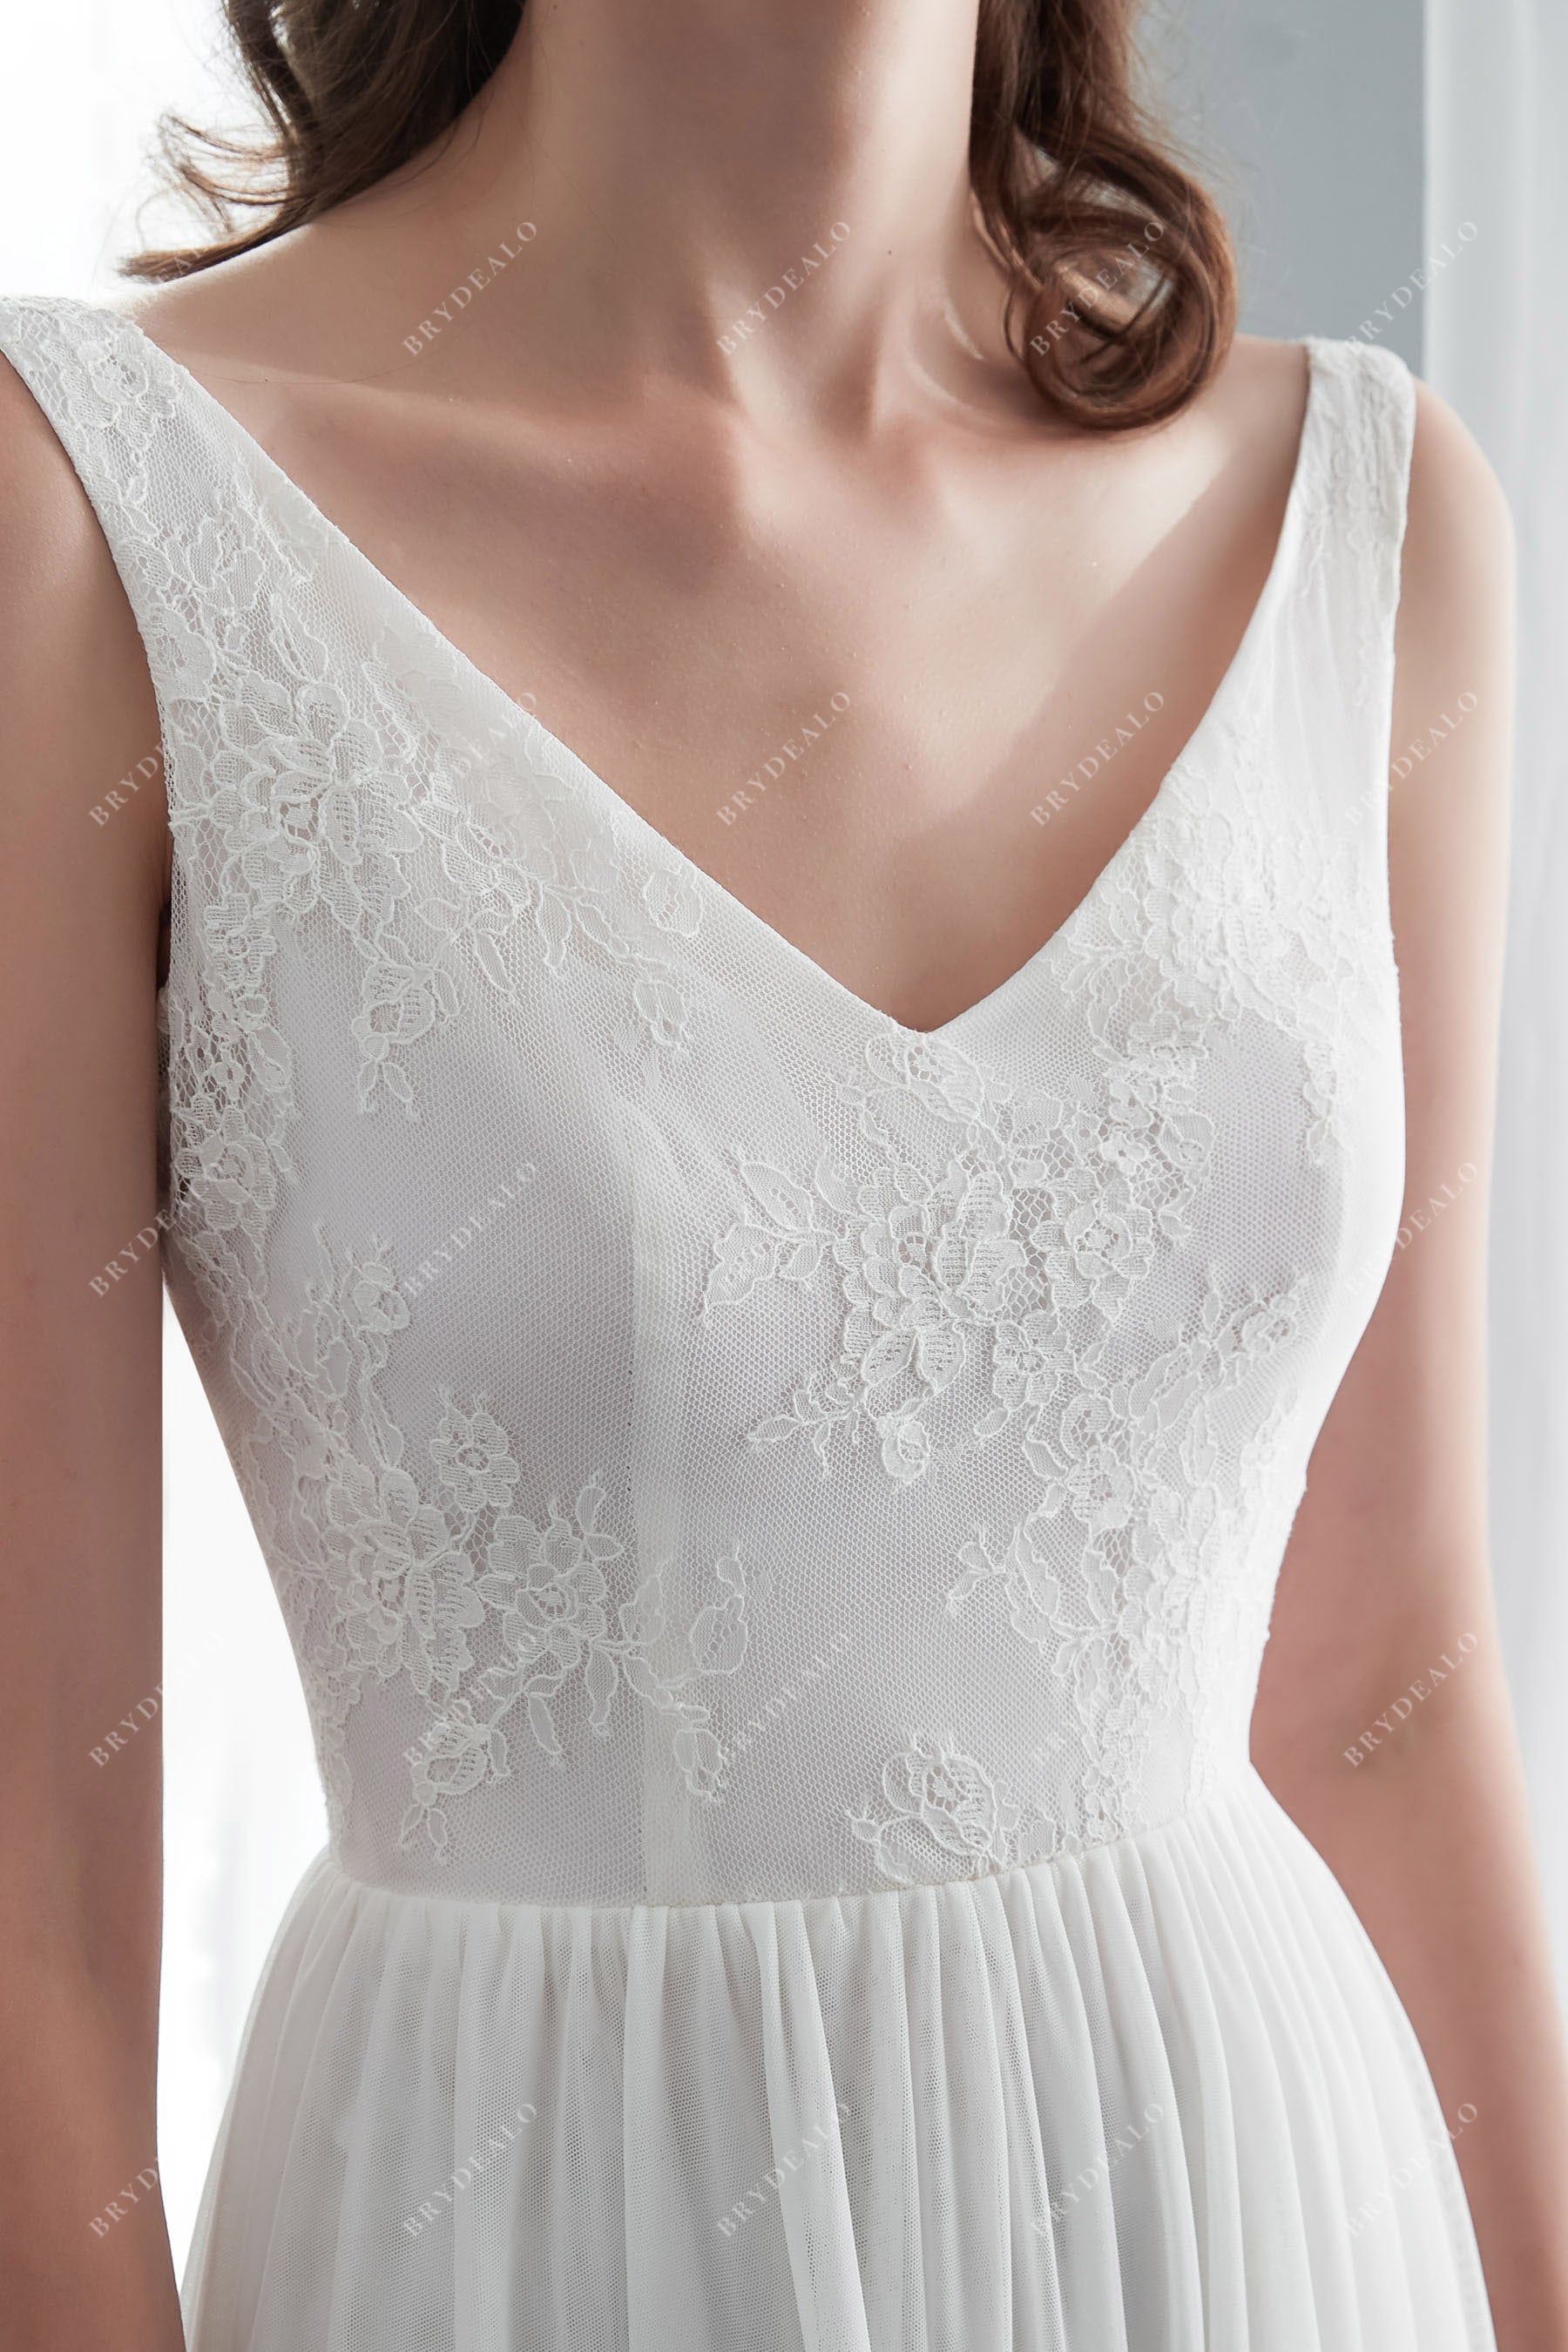 V-neck Simple Lace Draping Wedding Dress